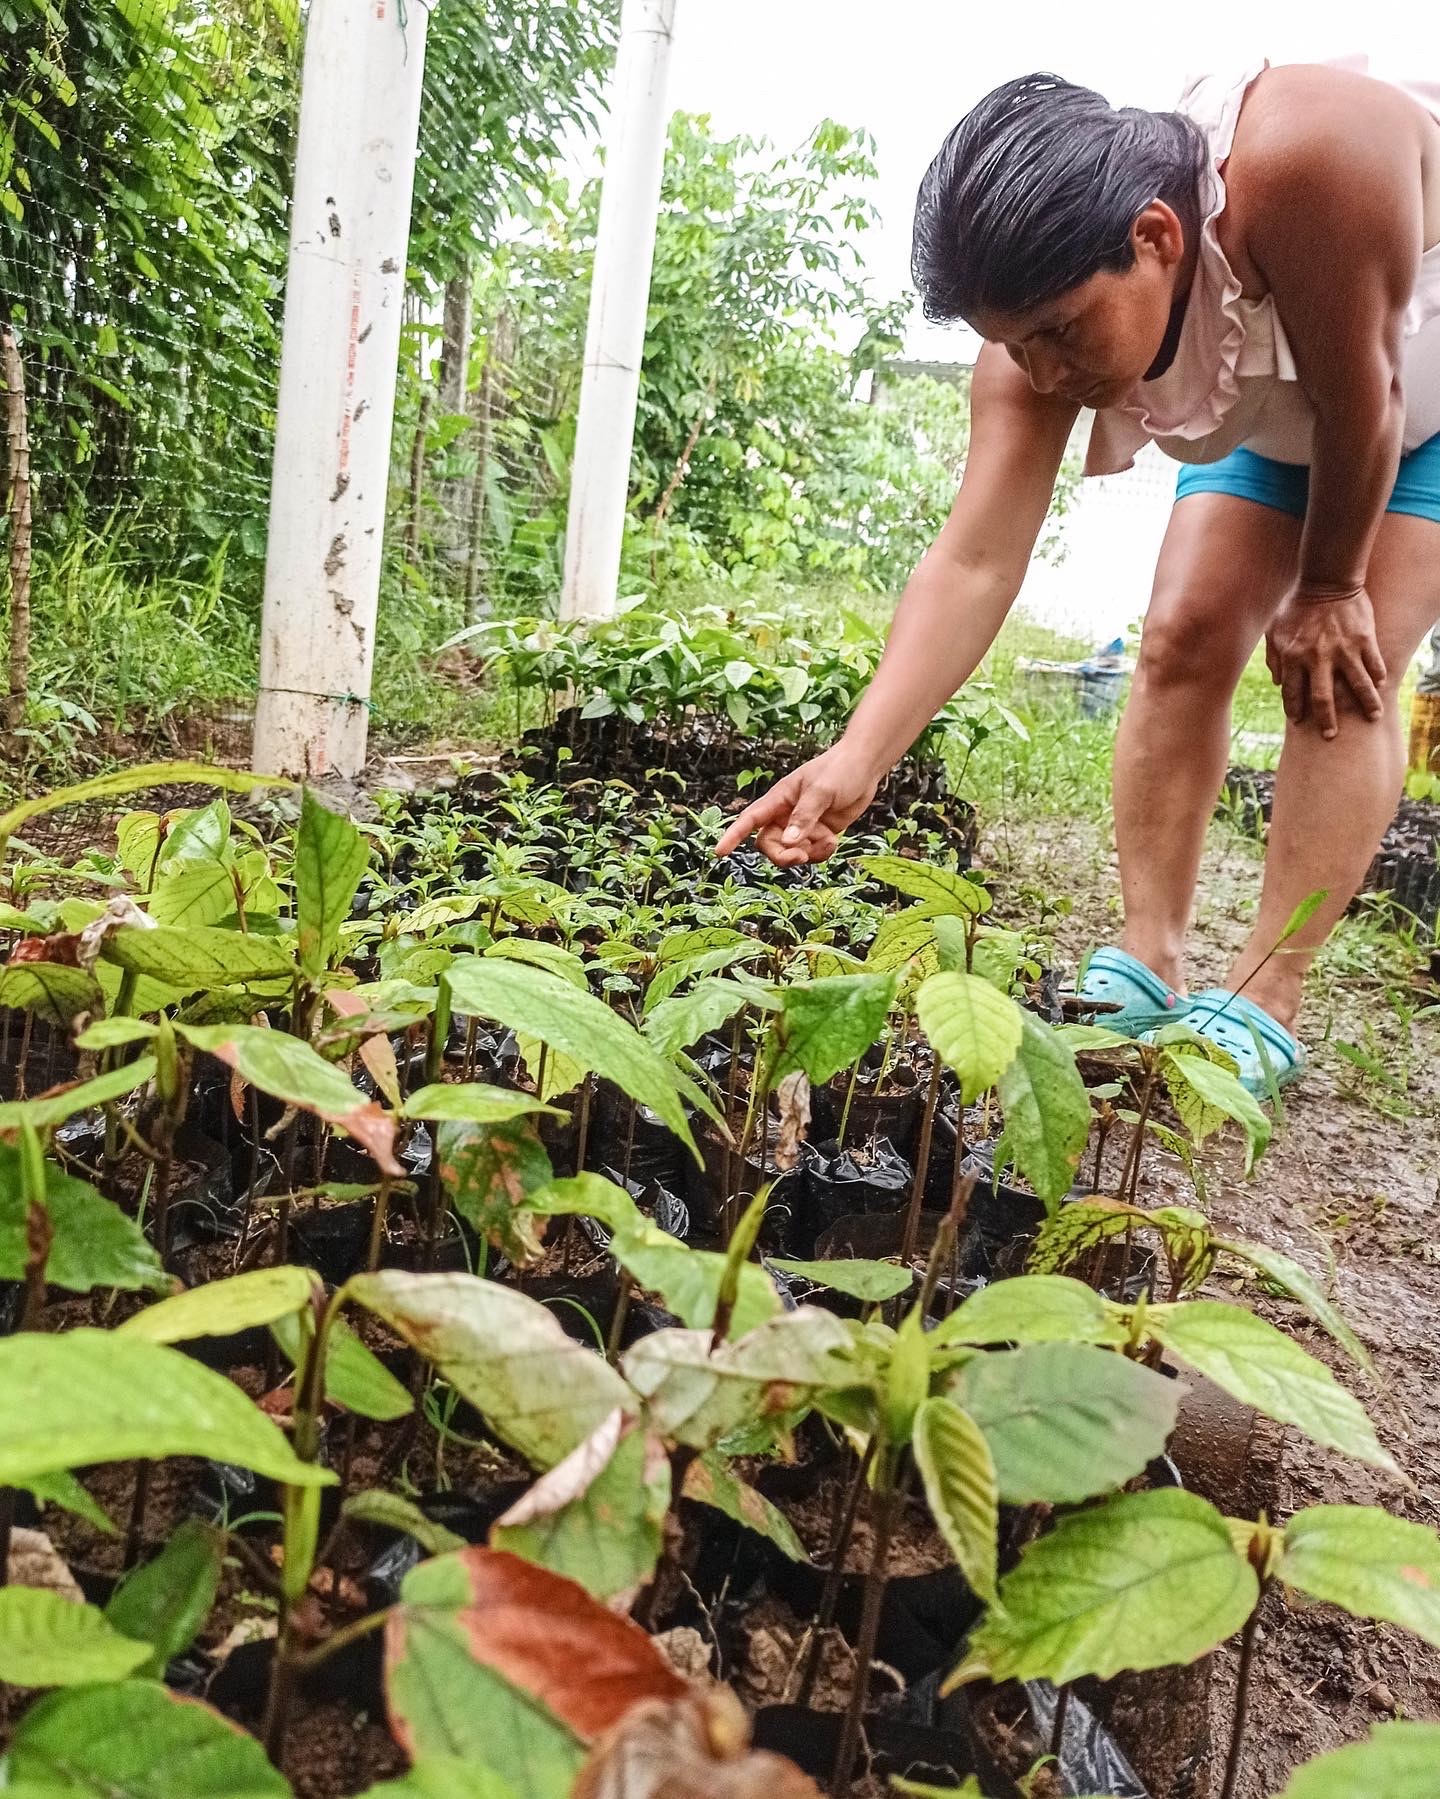 Paola and Miguel deliver seedlings to families who want to grow trees